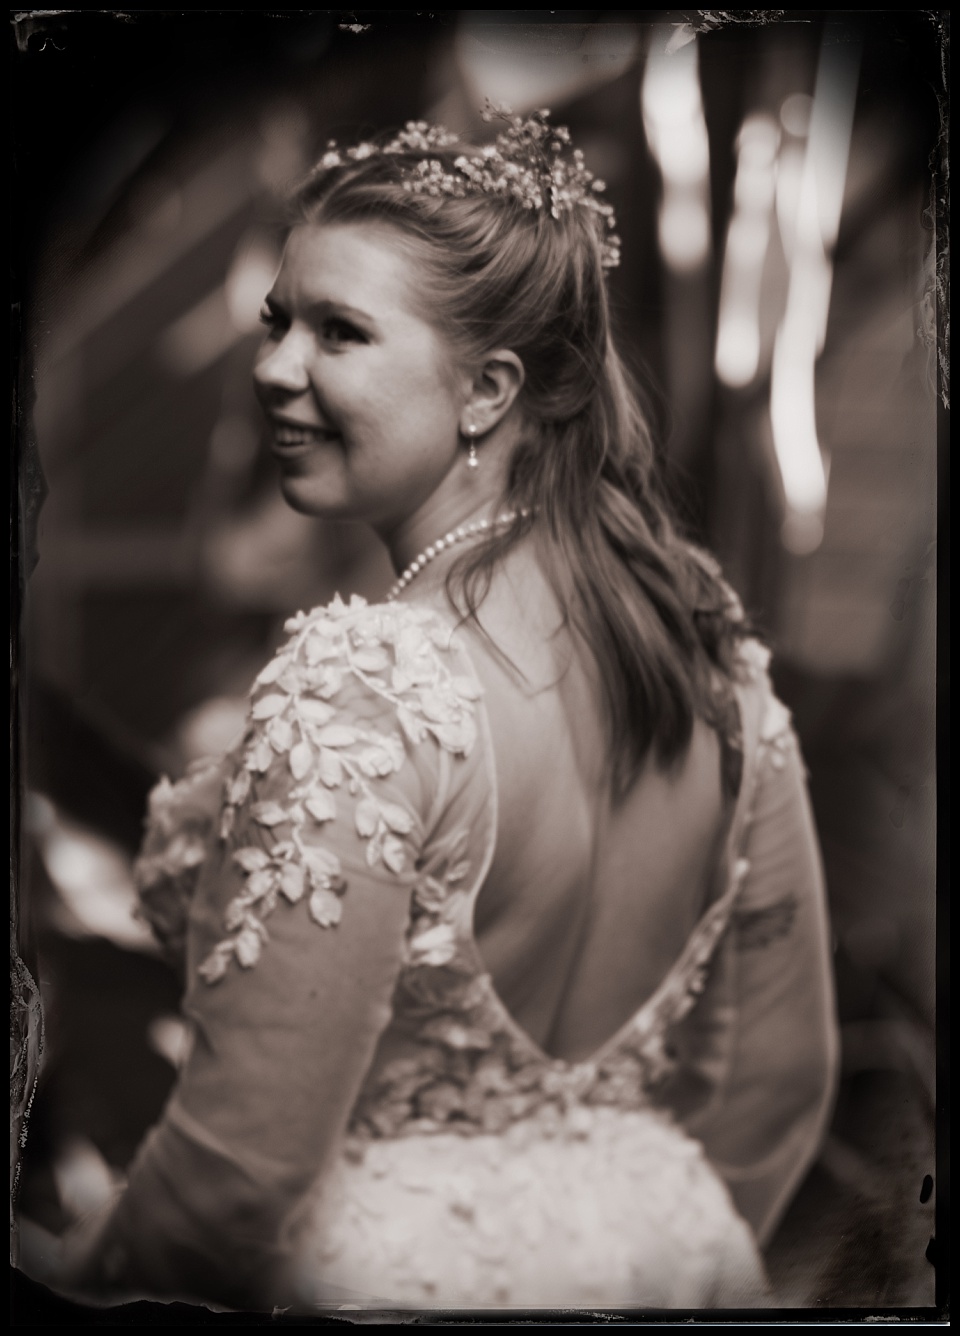 tintype of the bride alone at her wedding